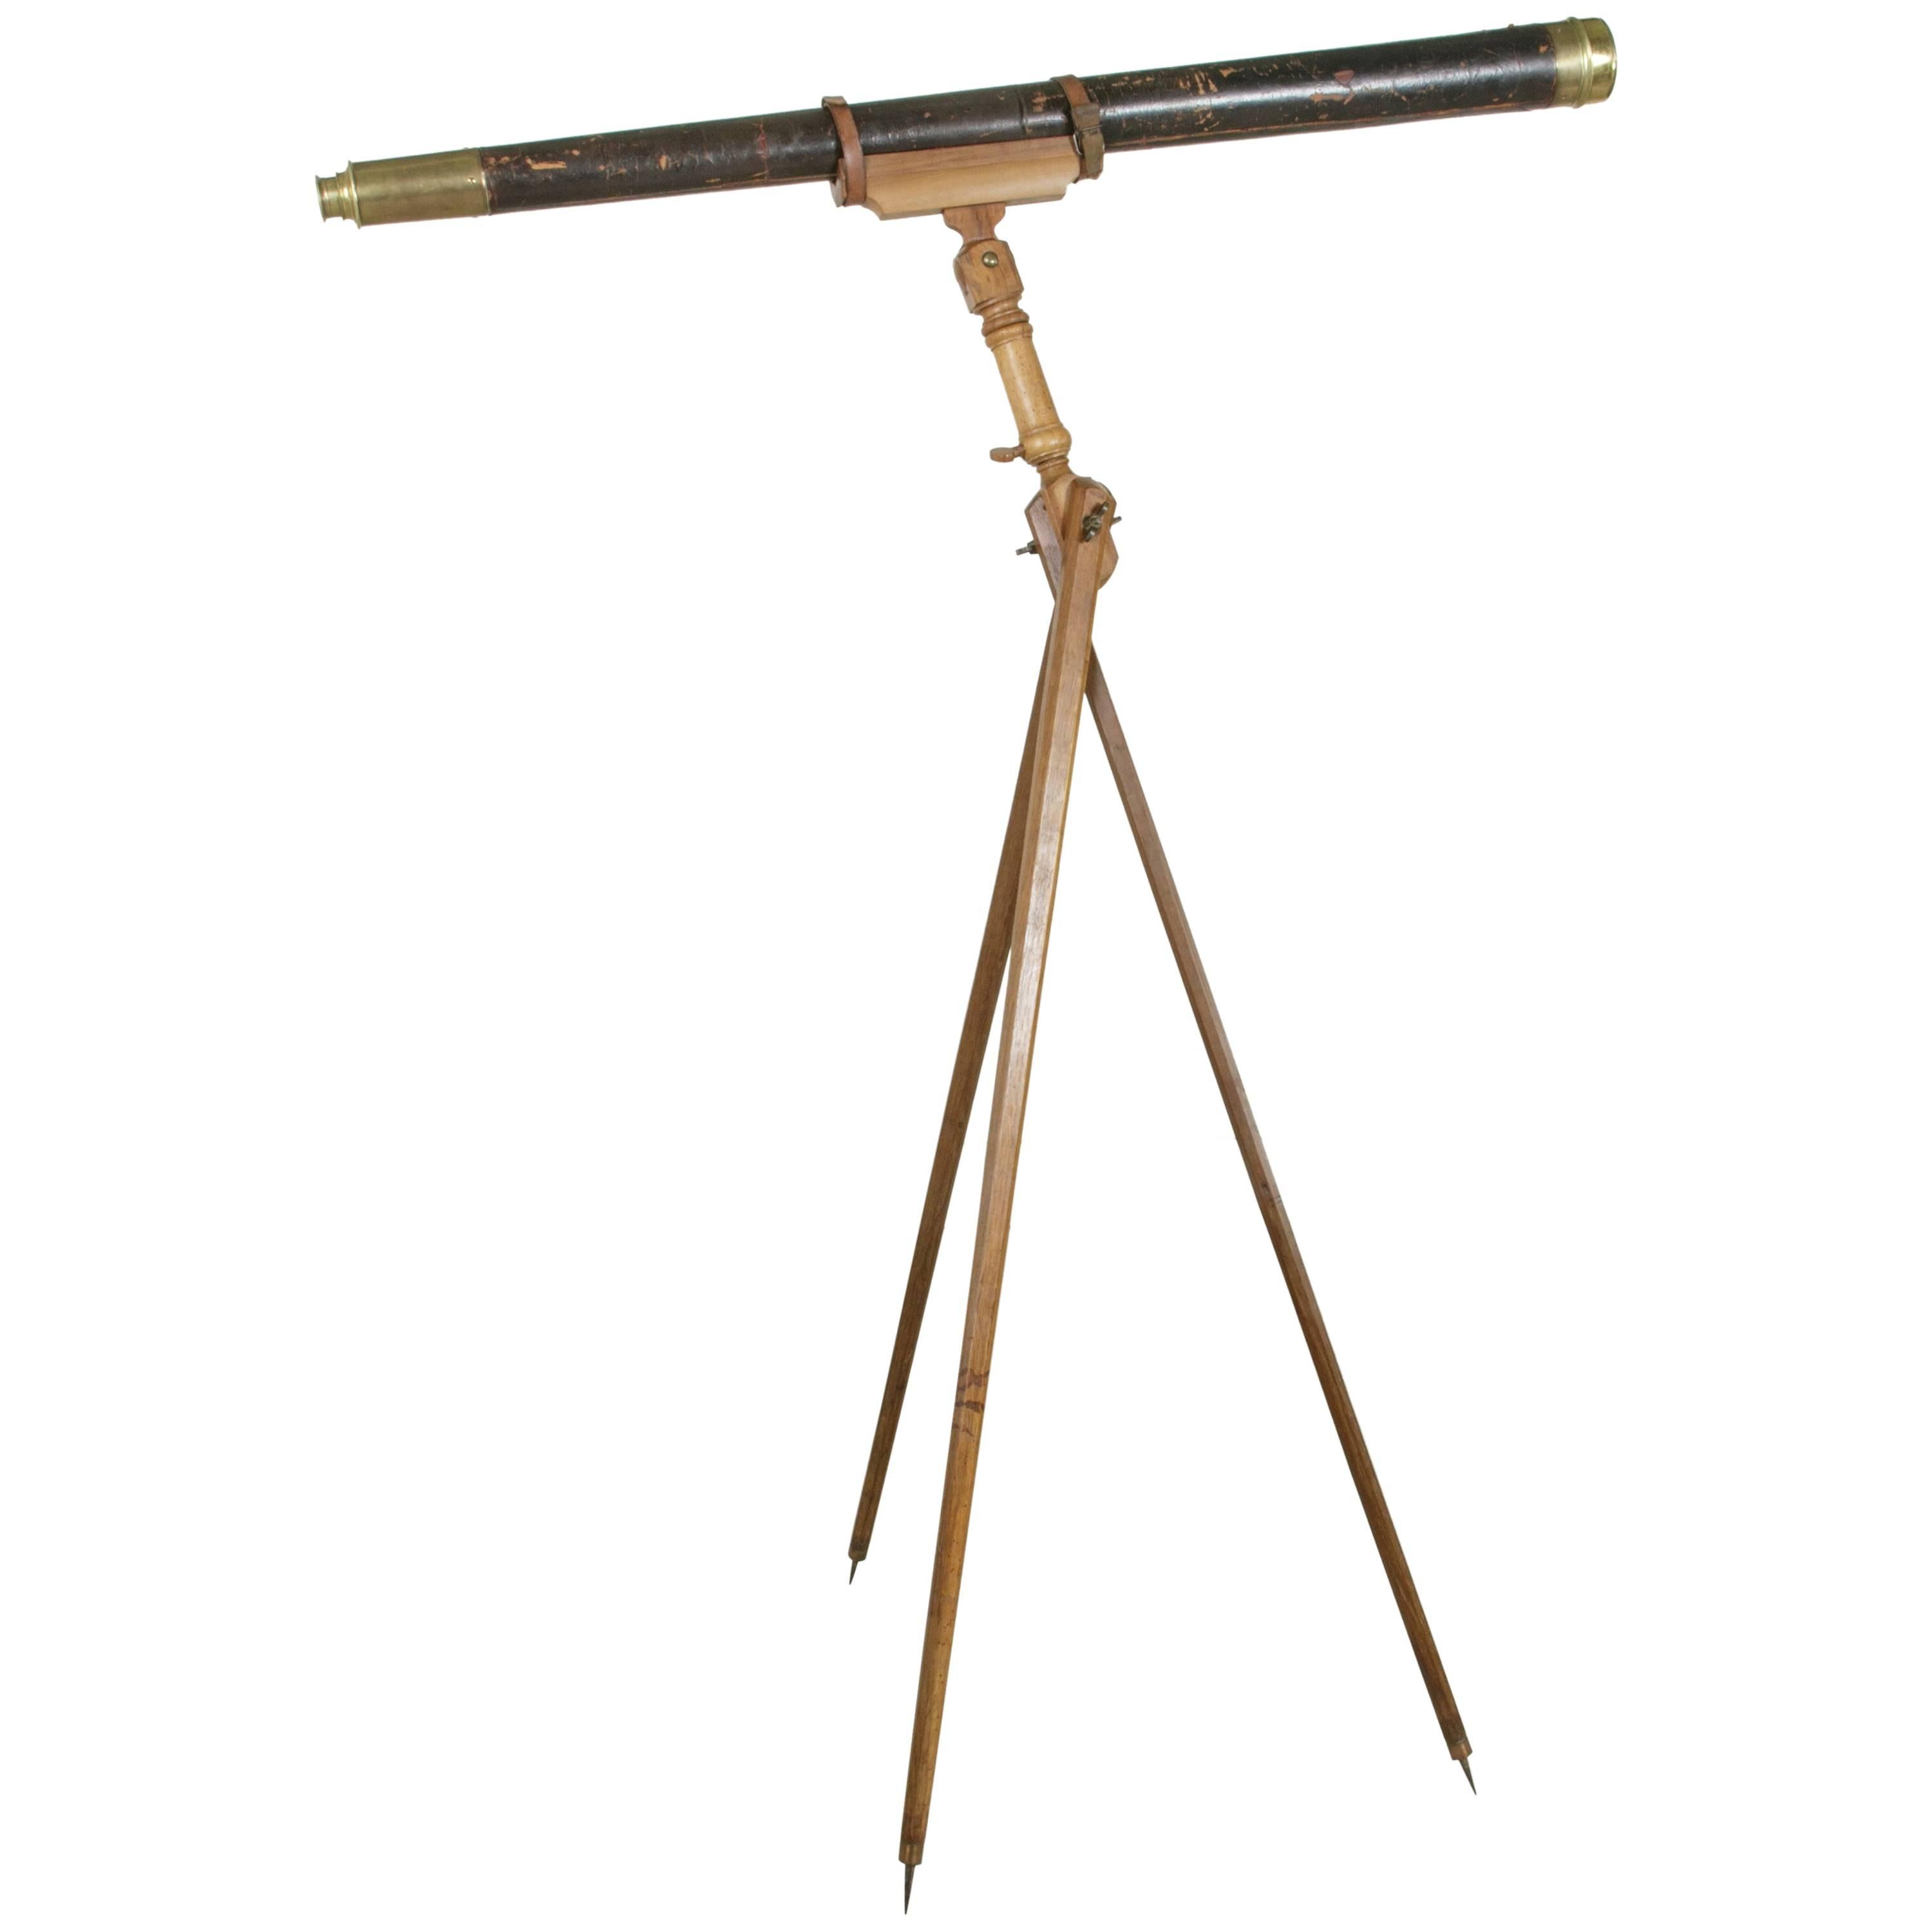 19th Century French Brass Telescope with Leather Wrap and Original Wooden Tripod